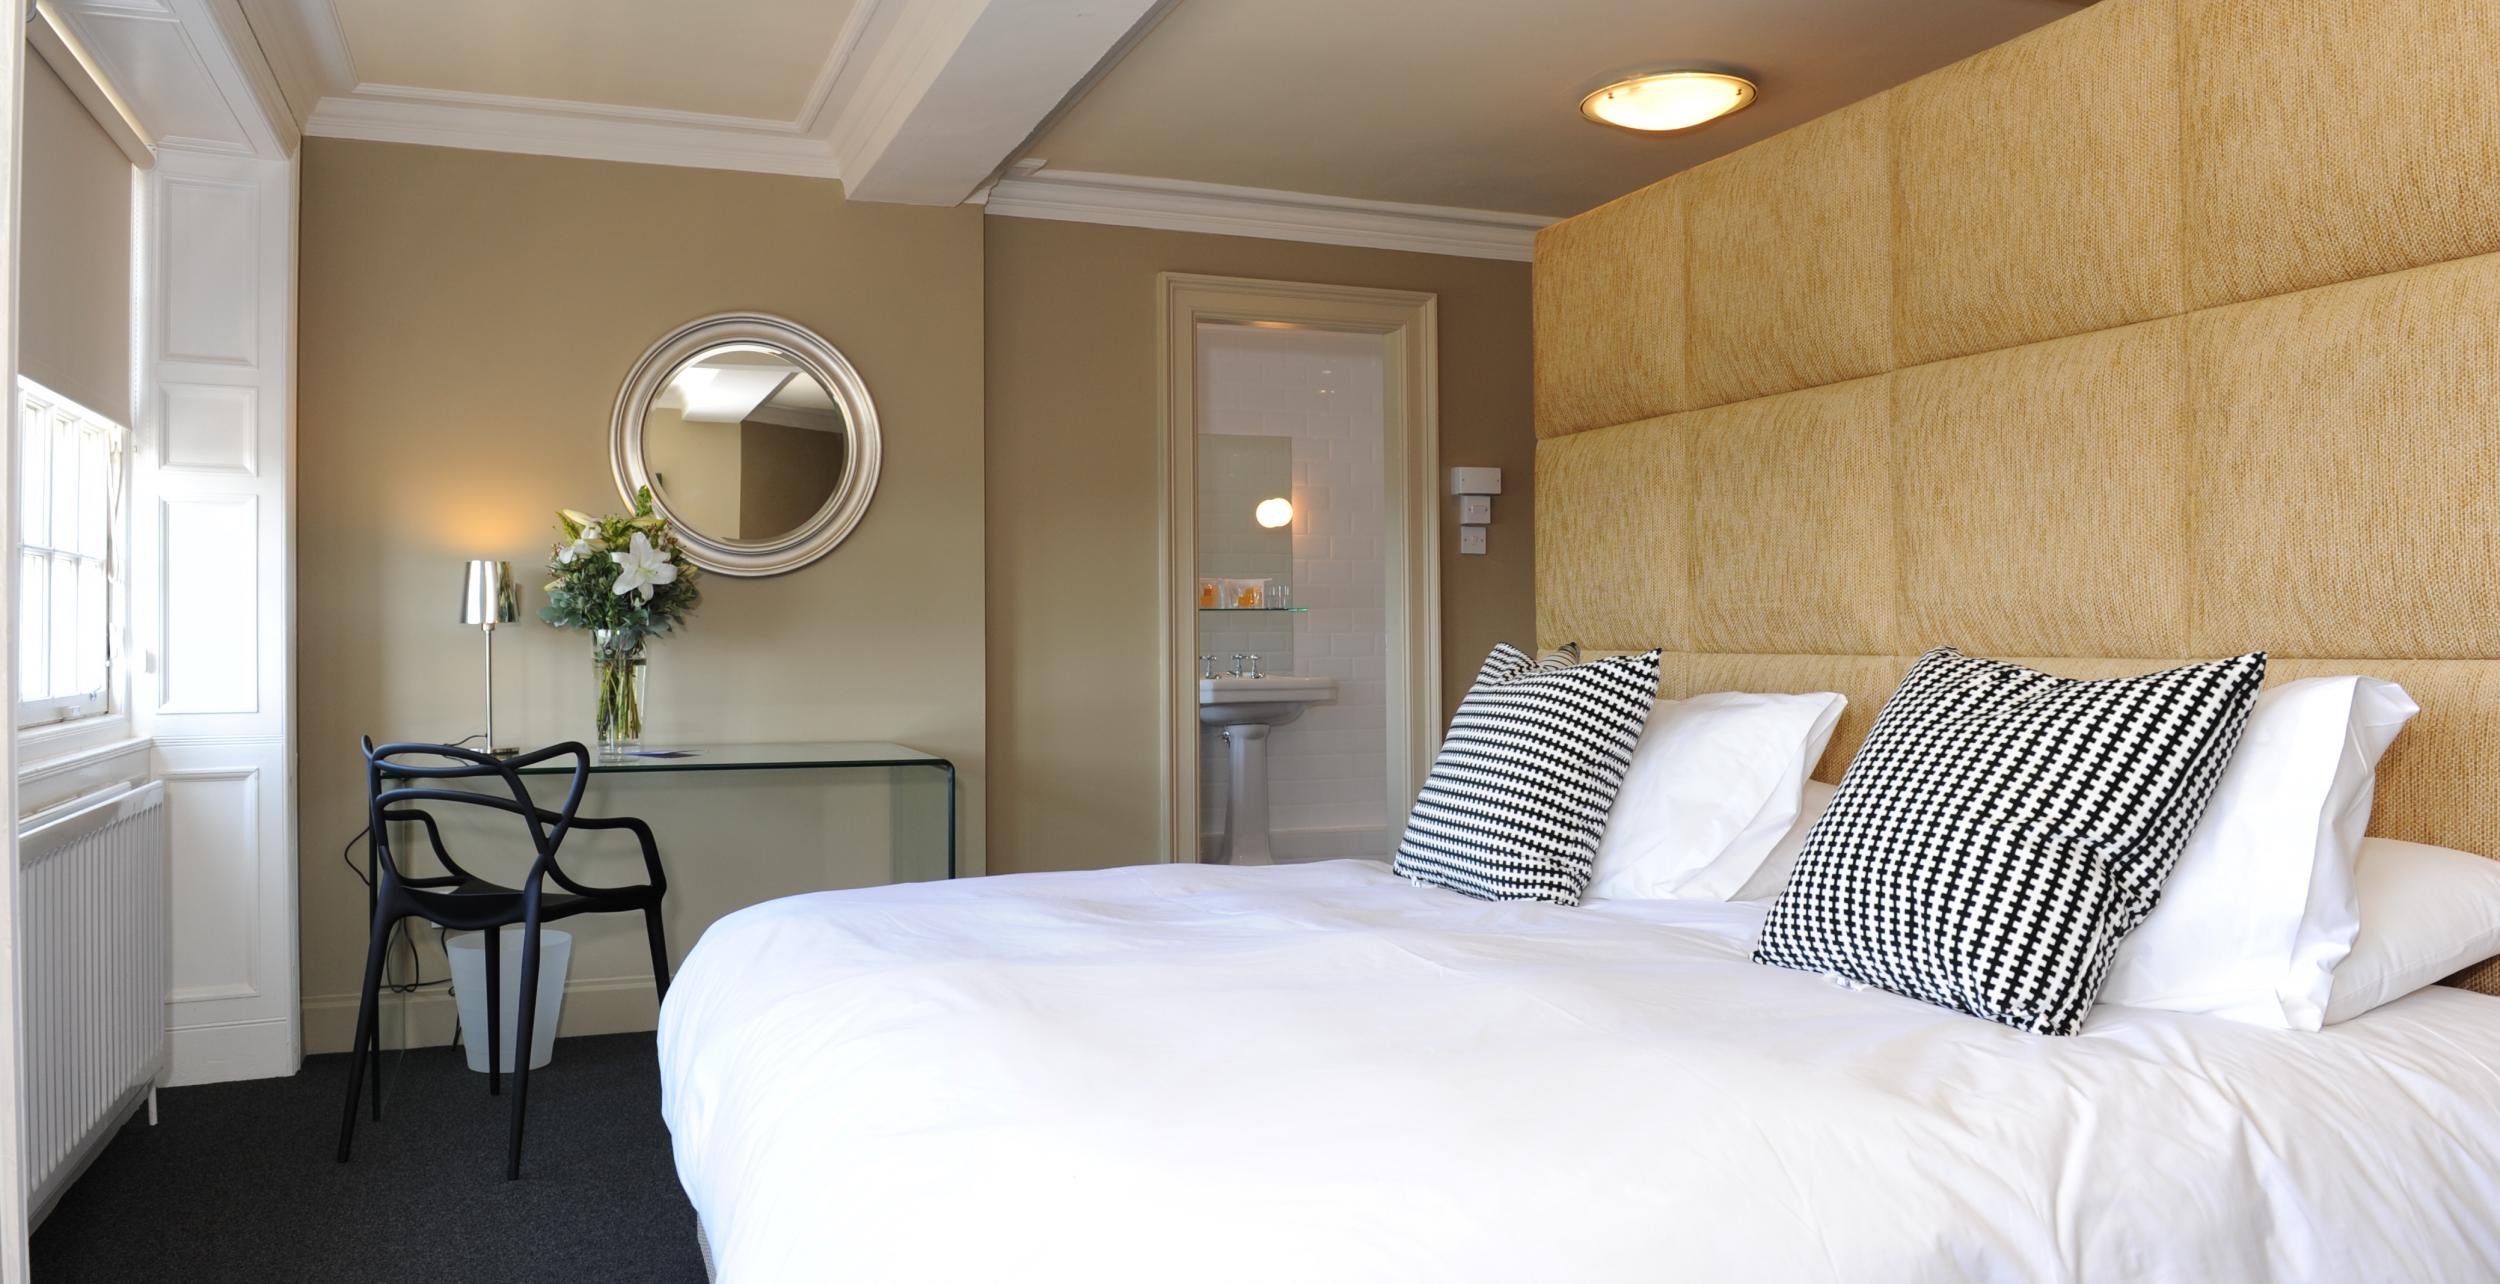 Comfy beds and homely decor at B+B Edinburgh, plus excellent perks like free bikes and afternoon tea